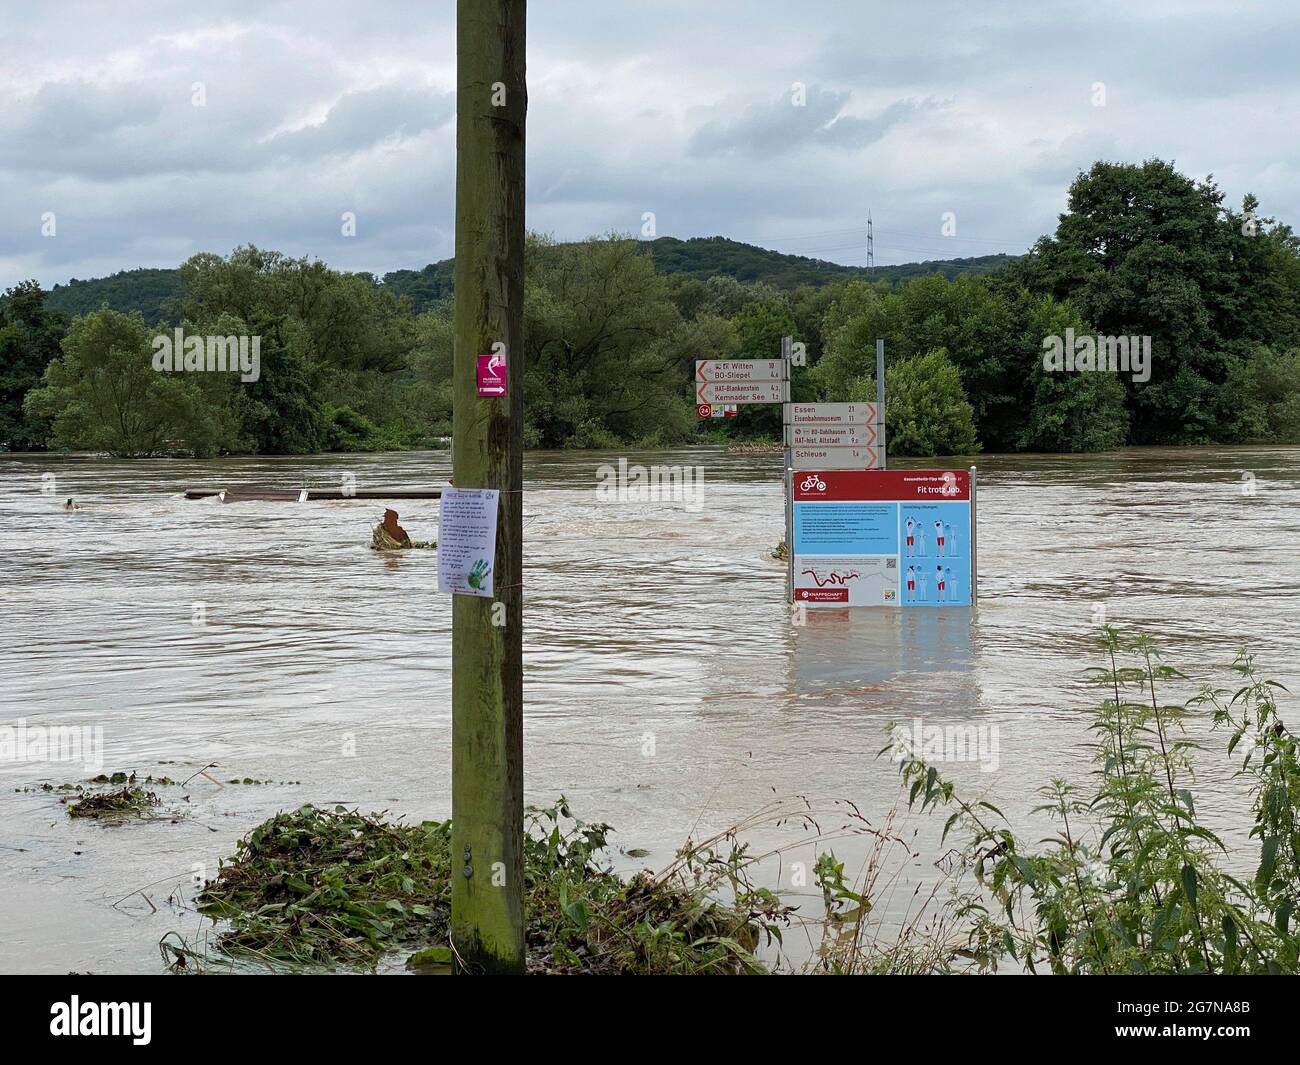 firo: 15.07.2021, country and people, weather, floods in North Rhine-Westphalia, flooding, heavy rain, Bochum, the Ruhr near Stiepel has overflowed its banks, cycle paths and walking paths are flooded, Stock Photo